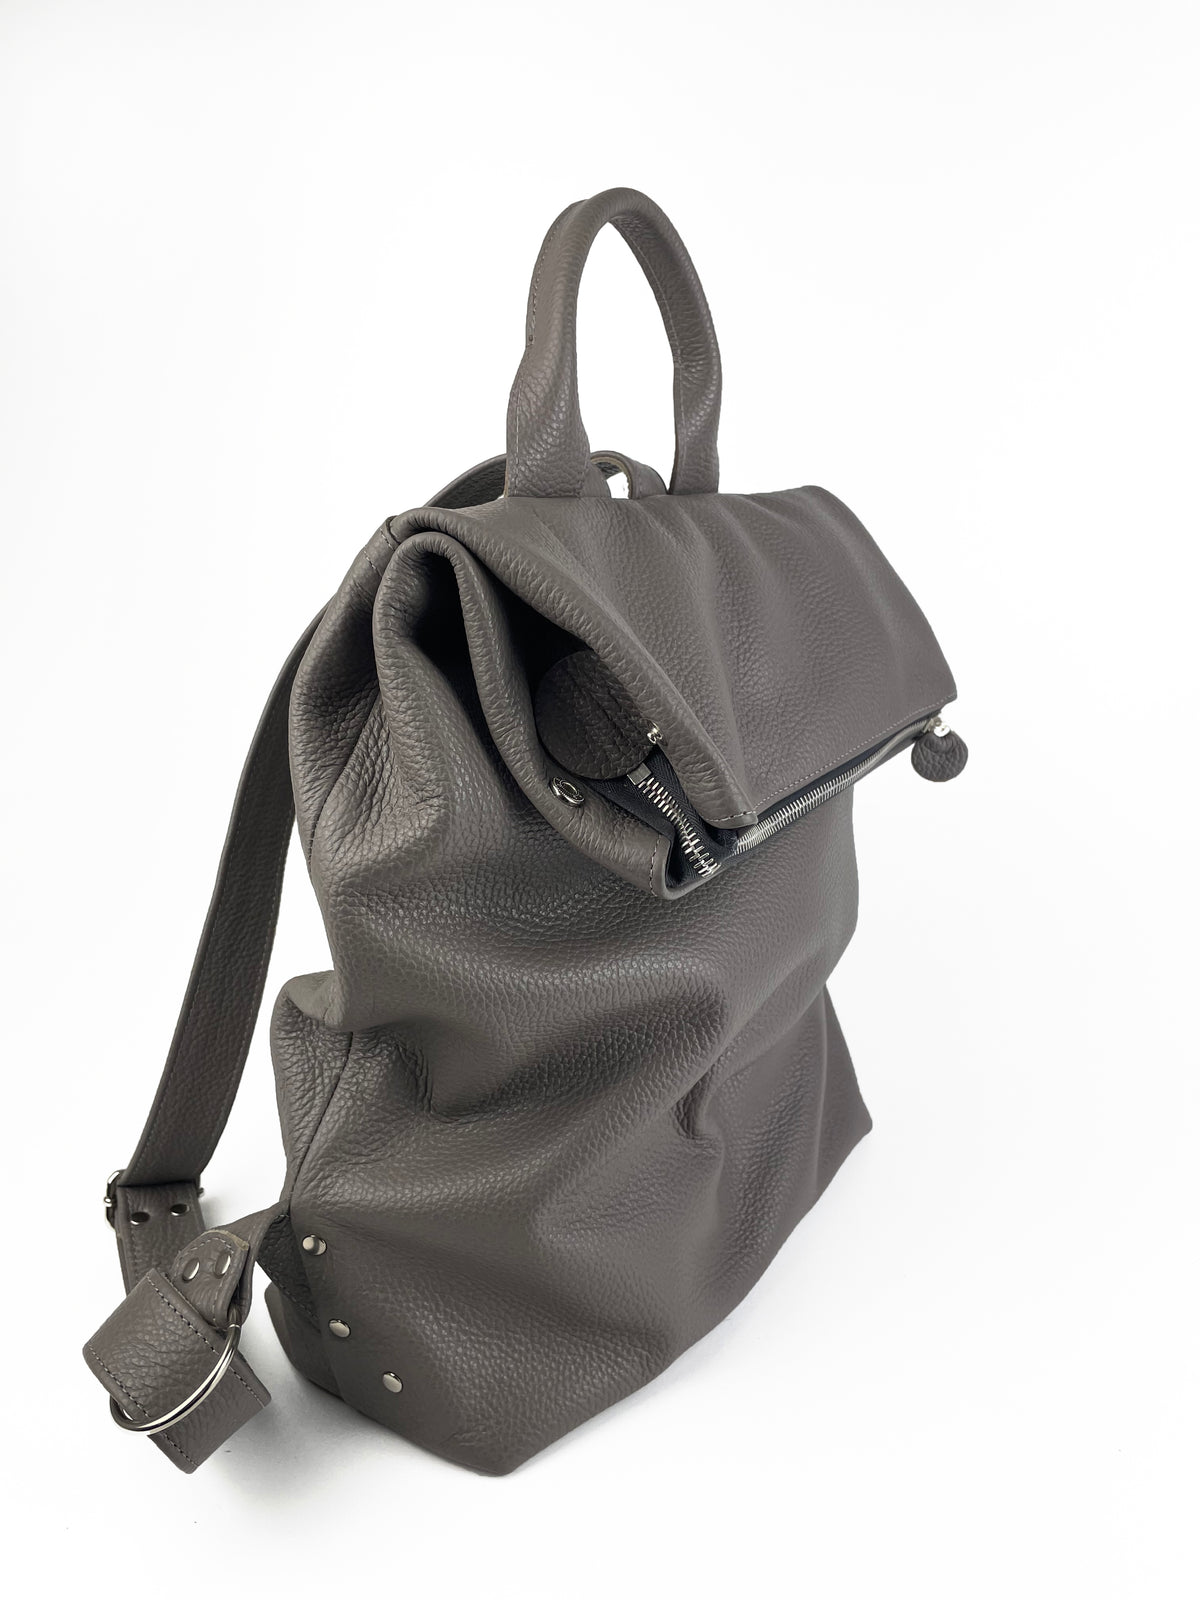 Nancy Rucksack in Taupe Pebble Leather